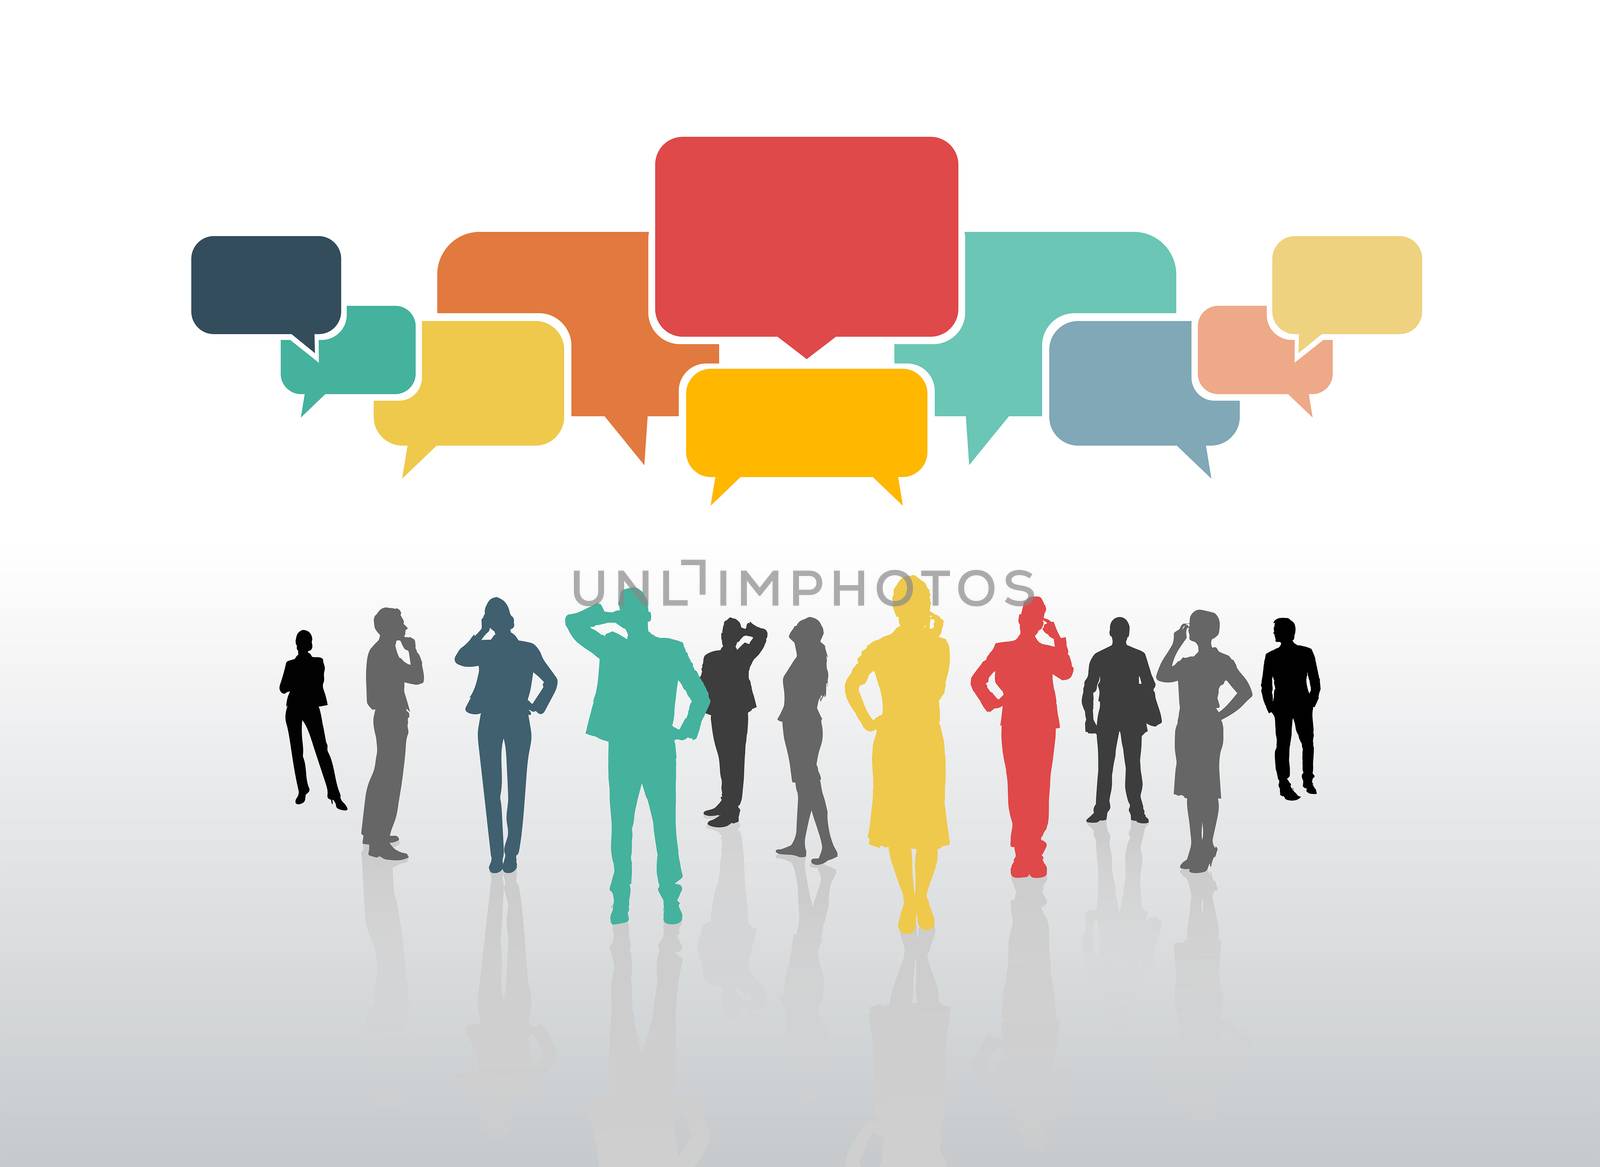 Business people with speech bubbles on grey background